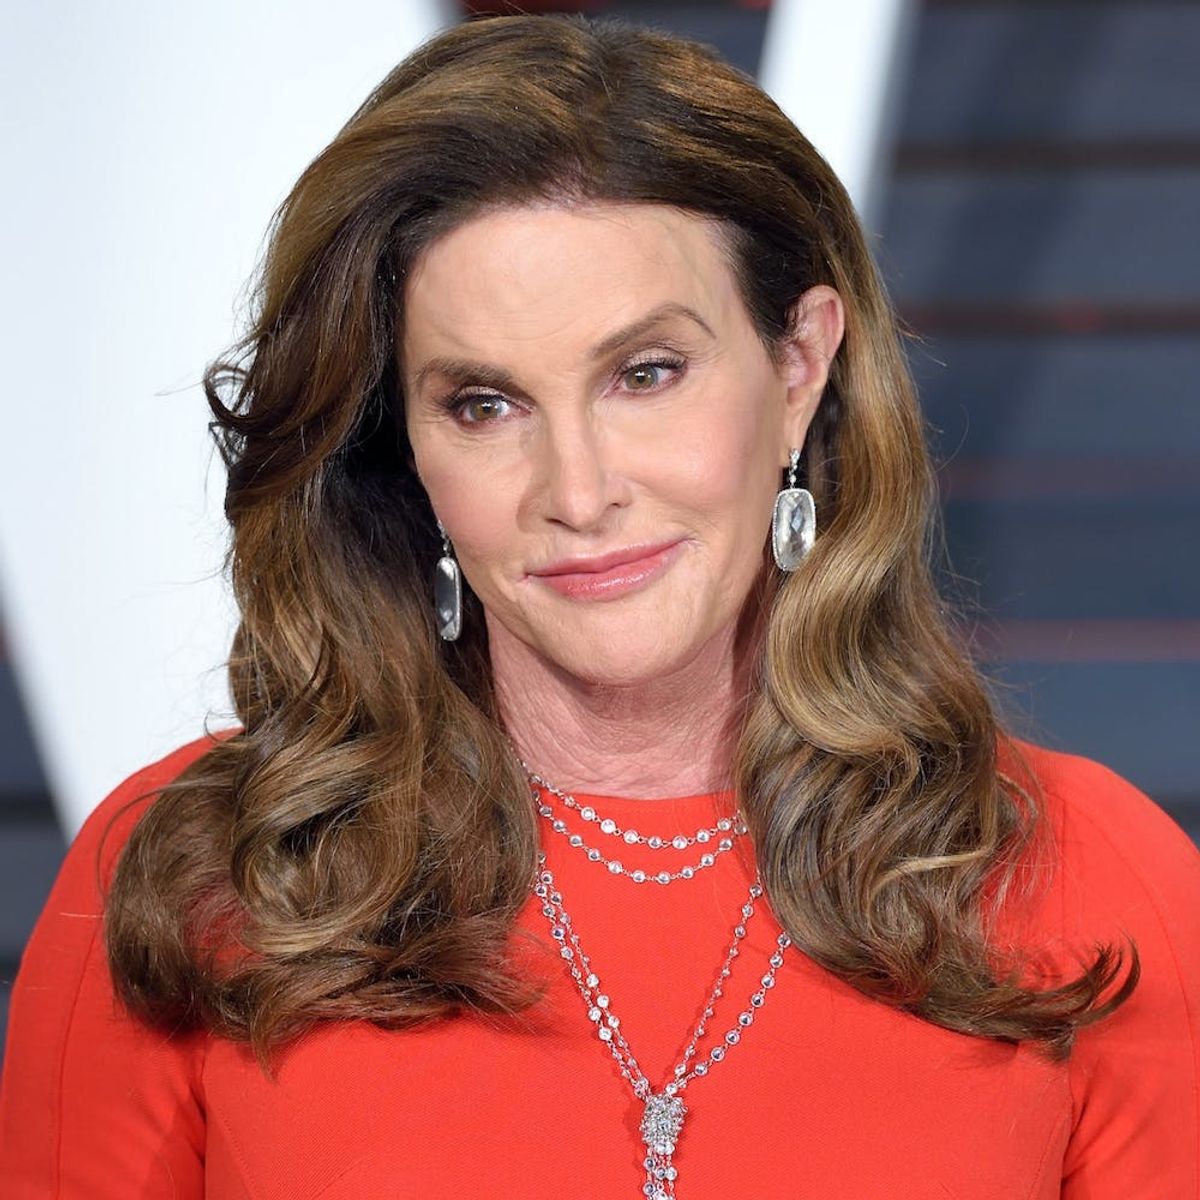 Check Out H&M’s Groundbreaking New Campaign Starring Caitlyn Jenner